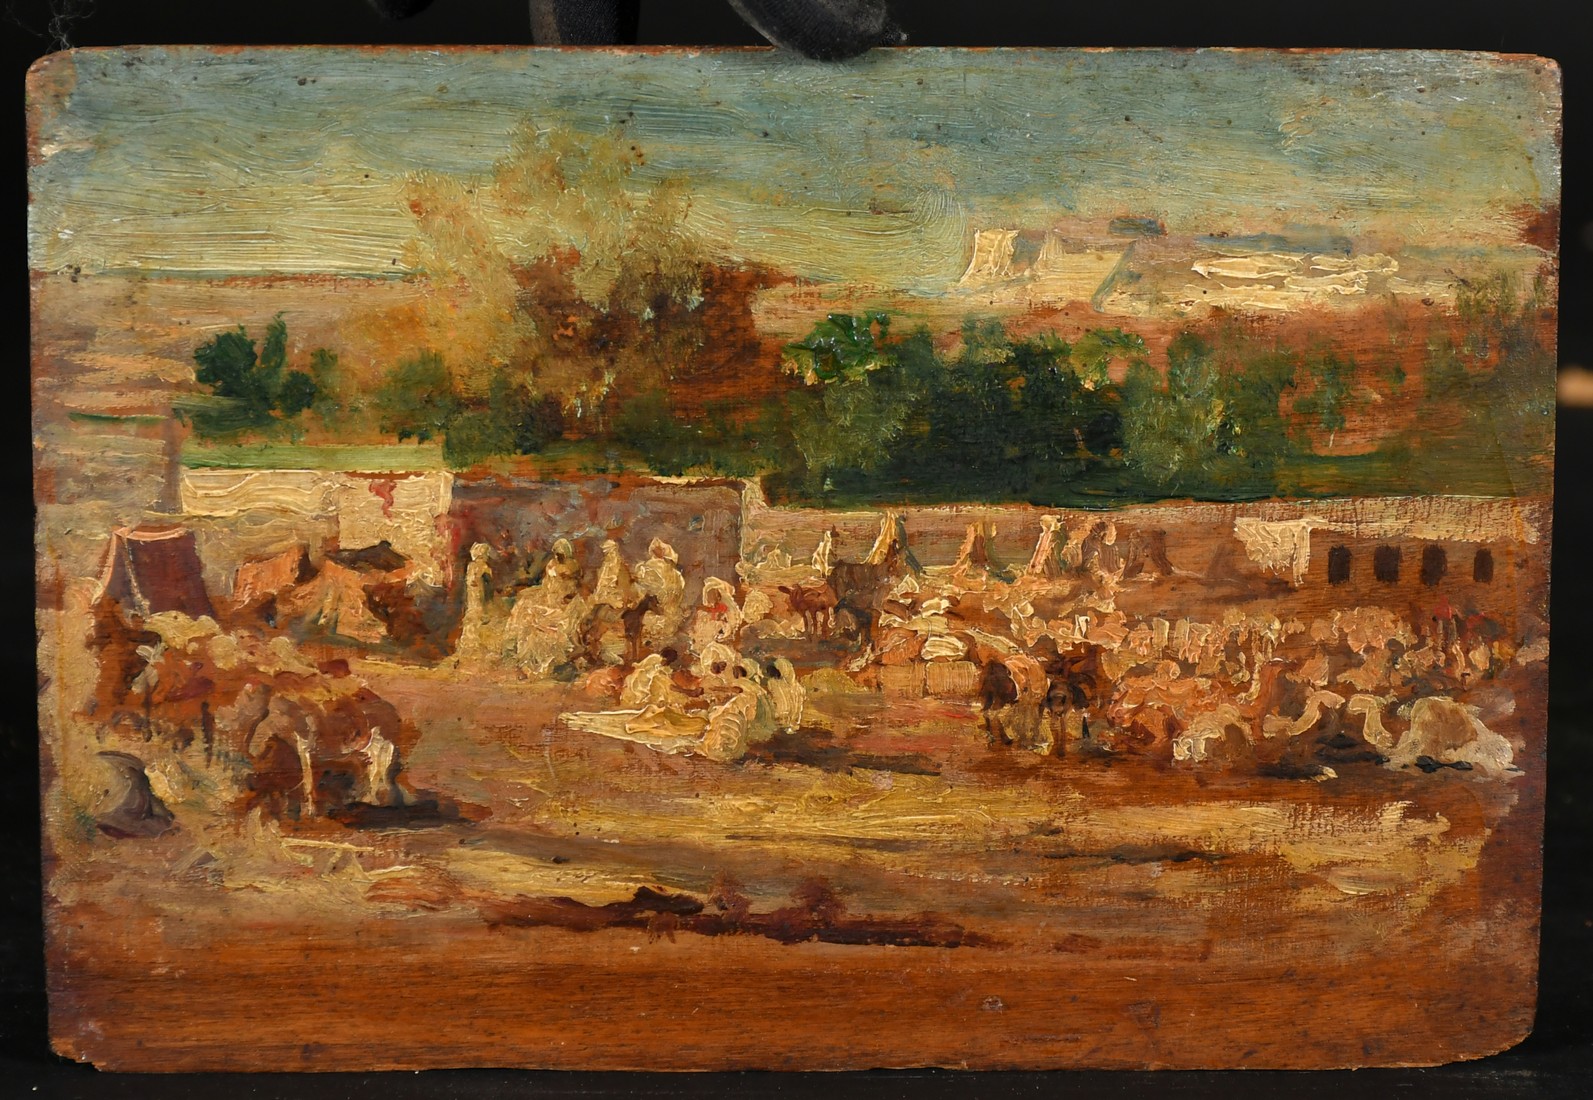 Early 20th Century, Figures and camels in an encampment, oil on panel, 5.25" x 7.5" (13 x 19cm), ( - Image 2 of 3